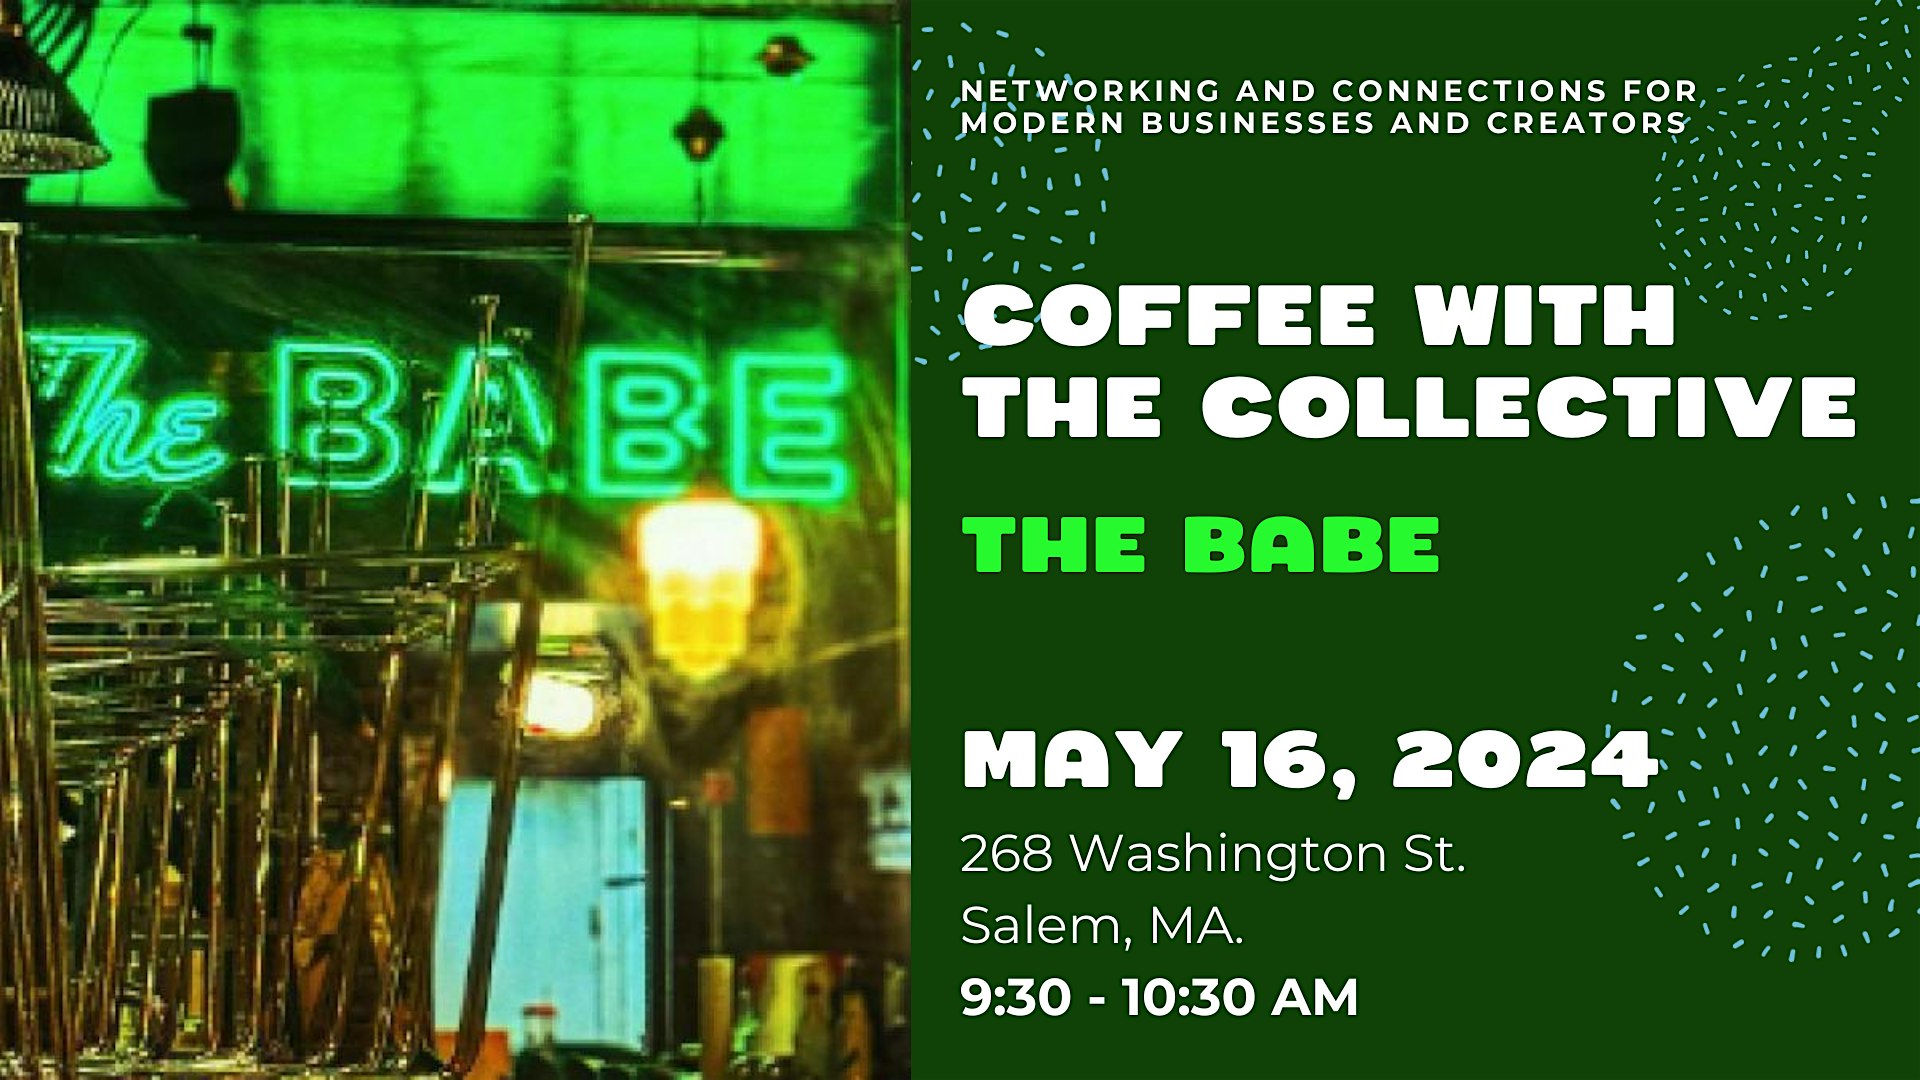 Join us for "Coffee with the Collective" at The Babe on May 16 at 9:30 AM. Find us at our cozy venue located at 268 Washington St. Don't miss this gathering filled with warm drinks and great conversation!